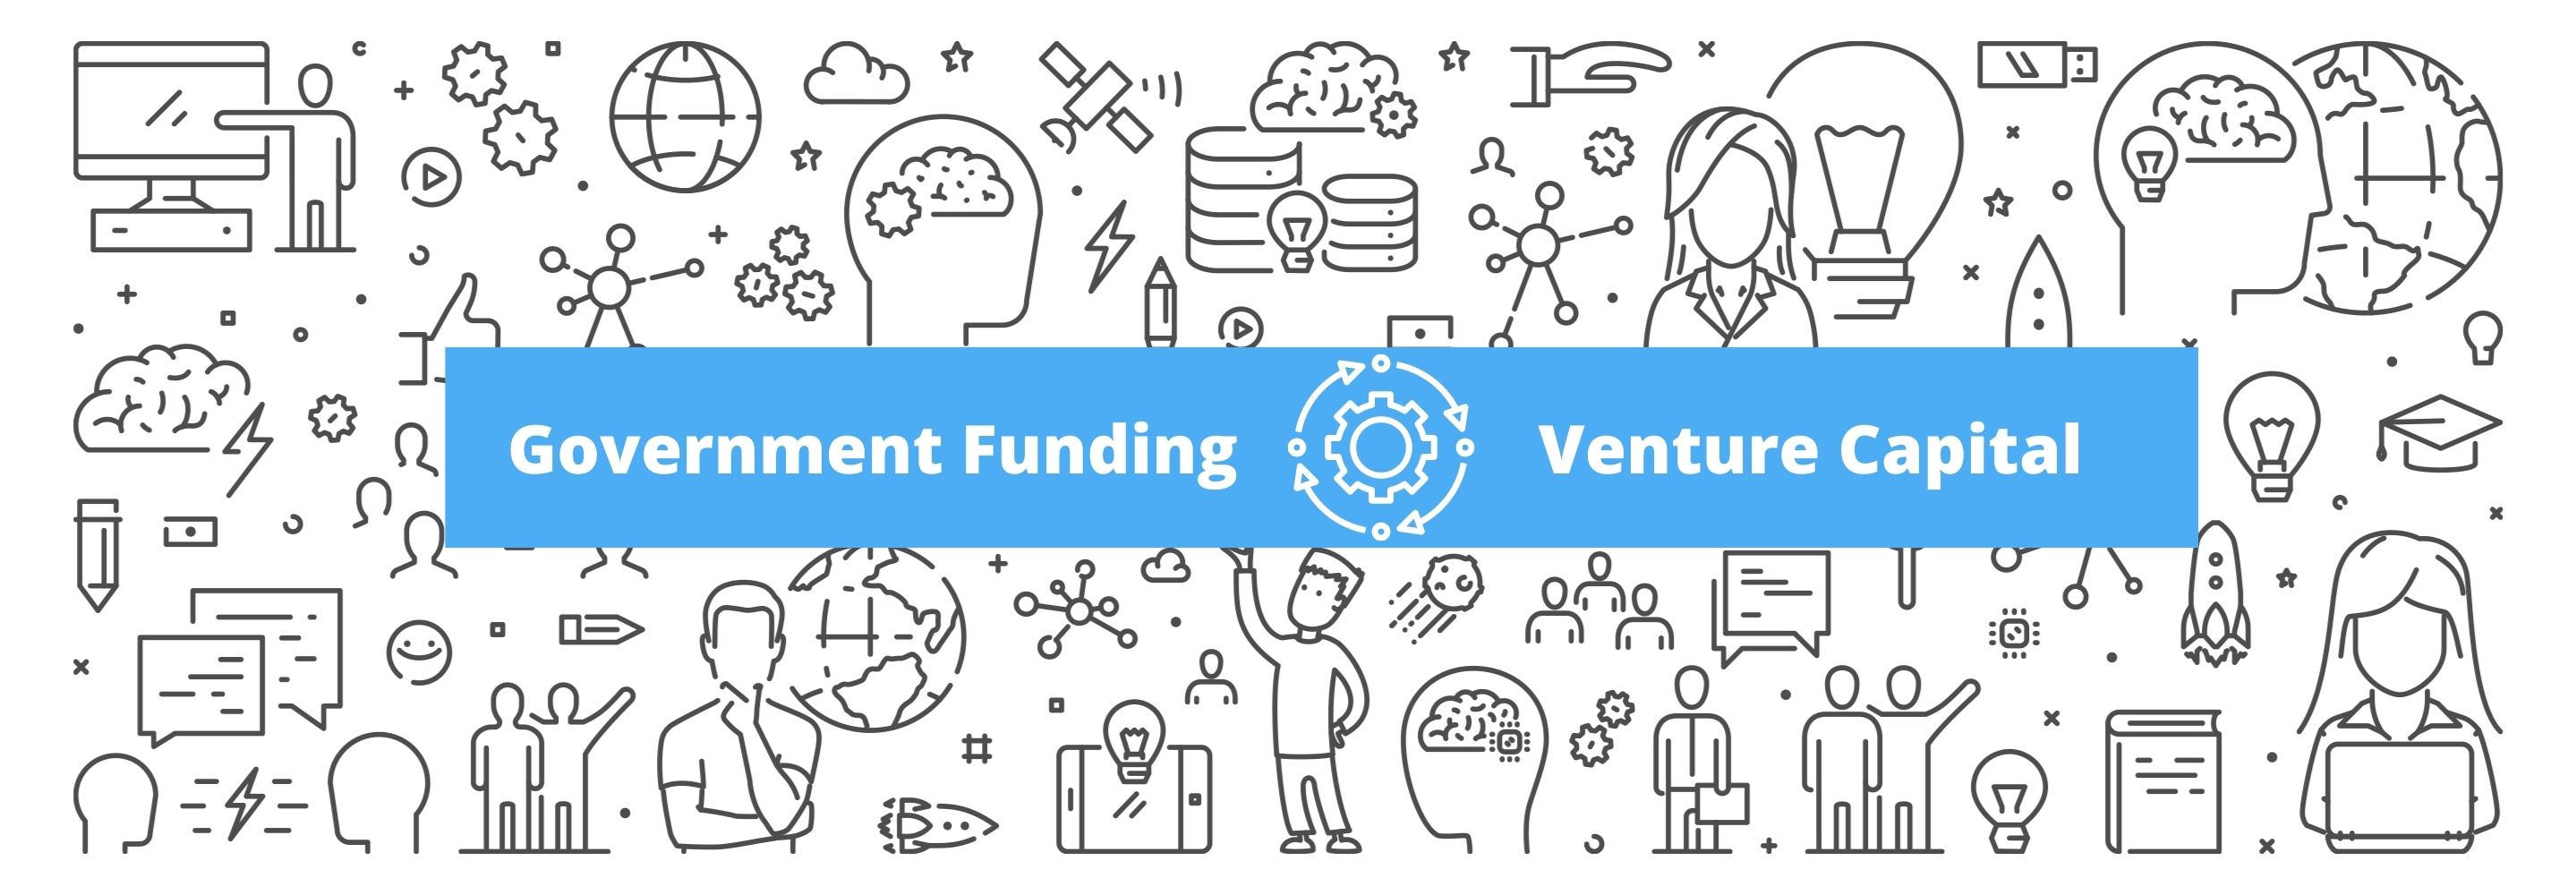 Government Funding & Venture Capital (5)